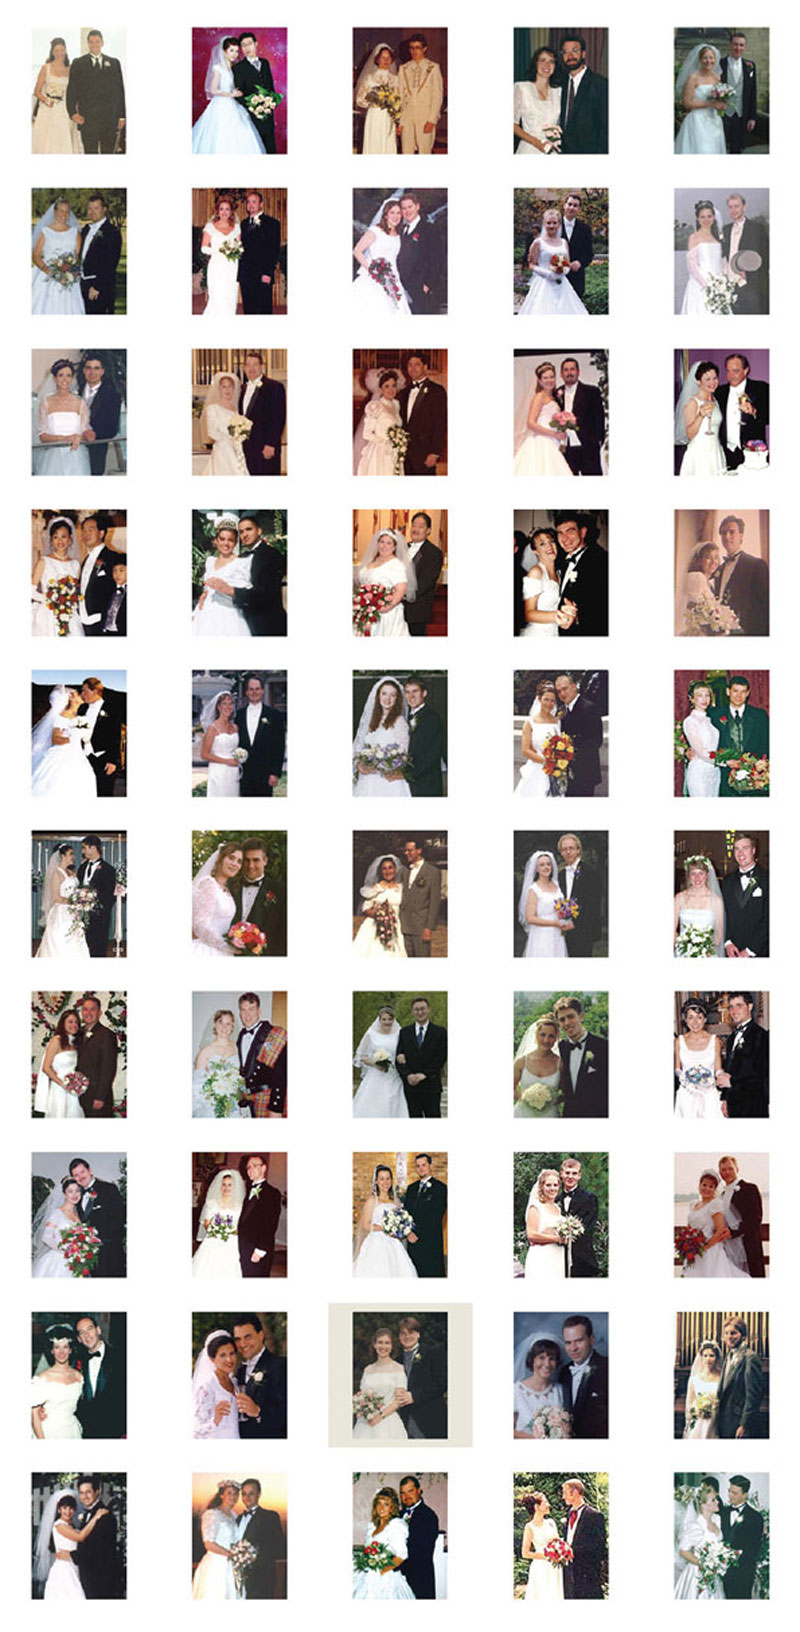 50 of the 100 photographs of newlyweds which served as sources for the composite image.